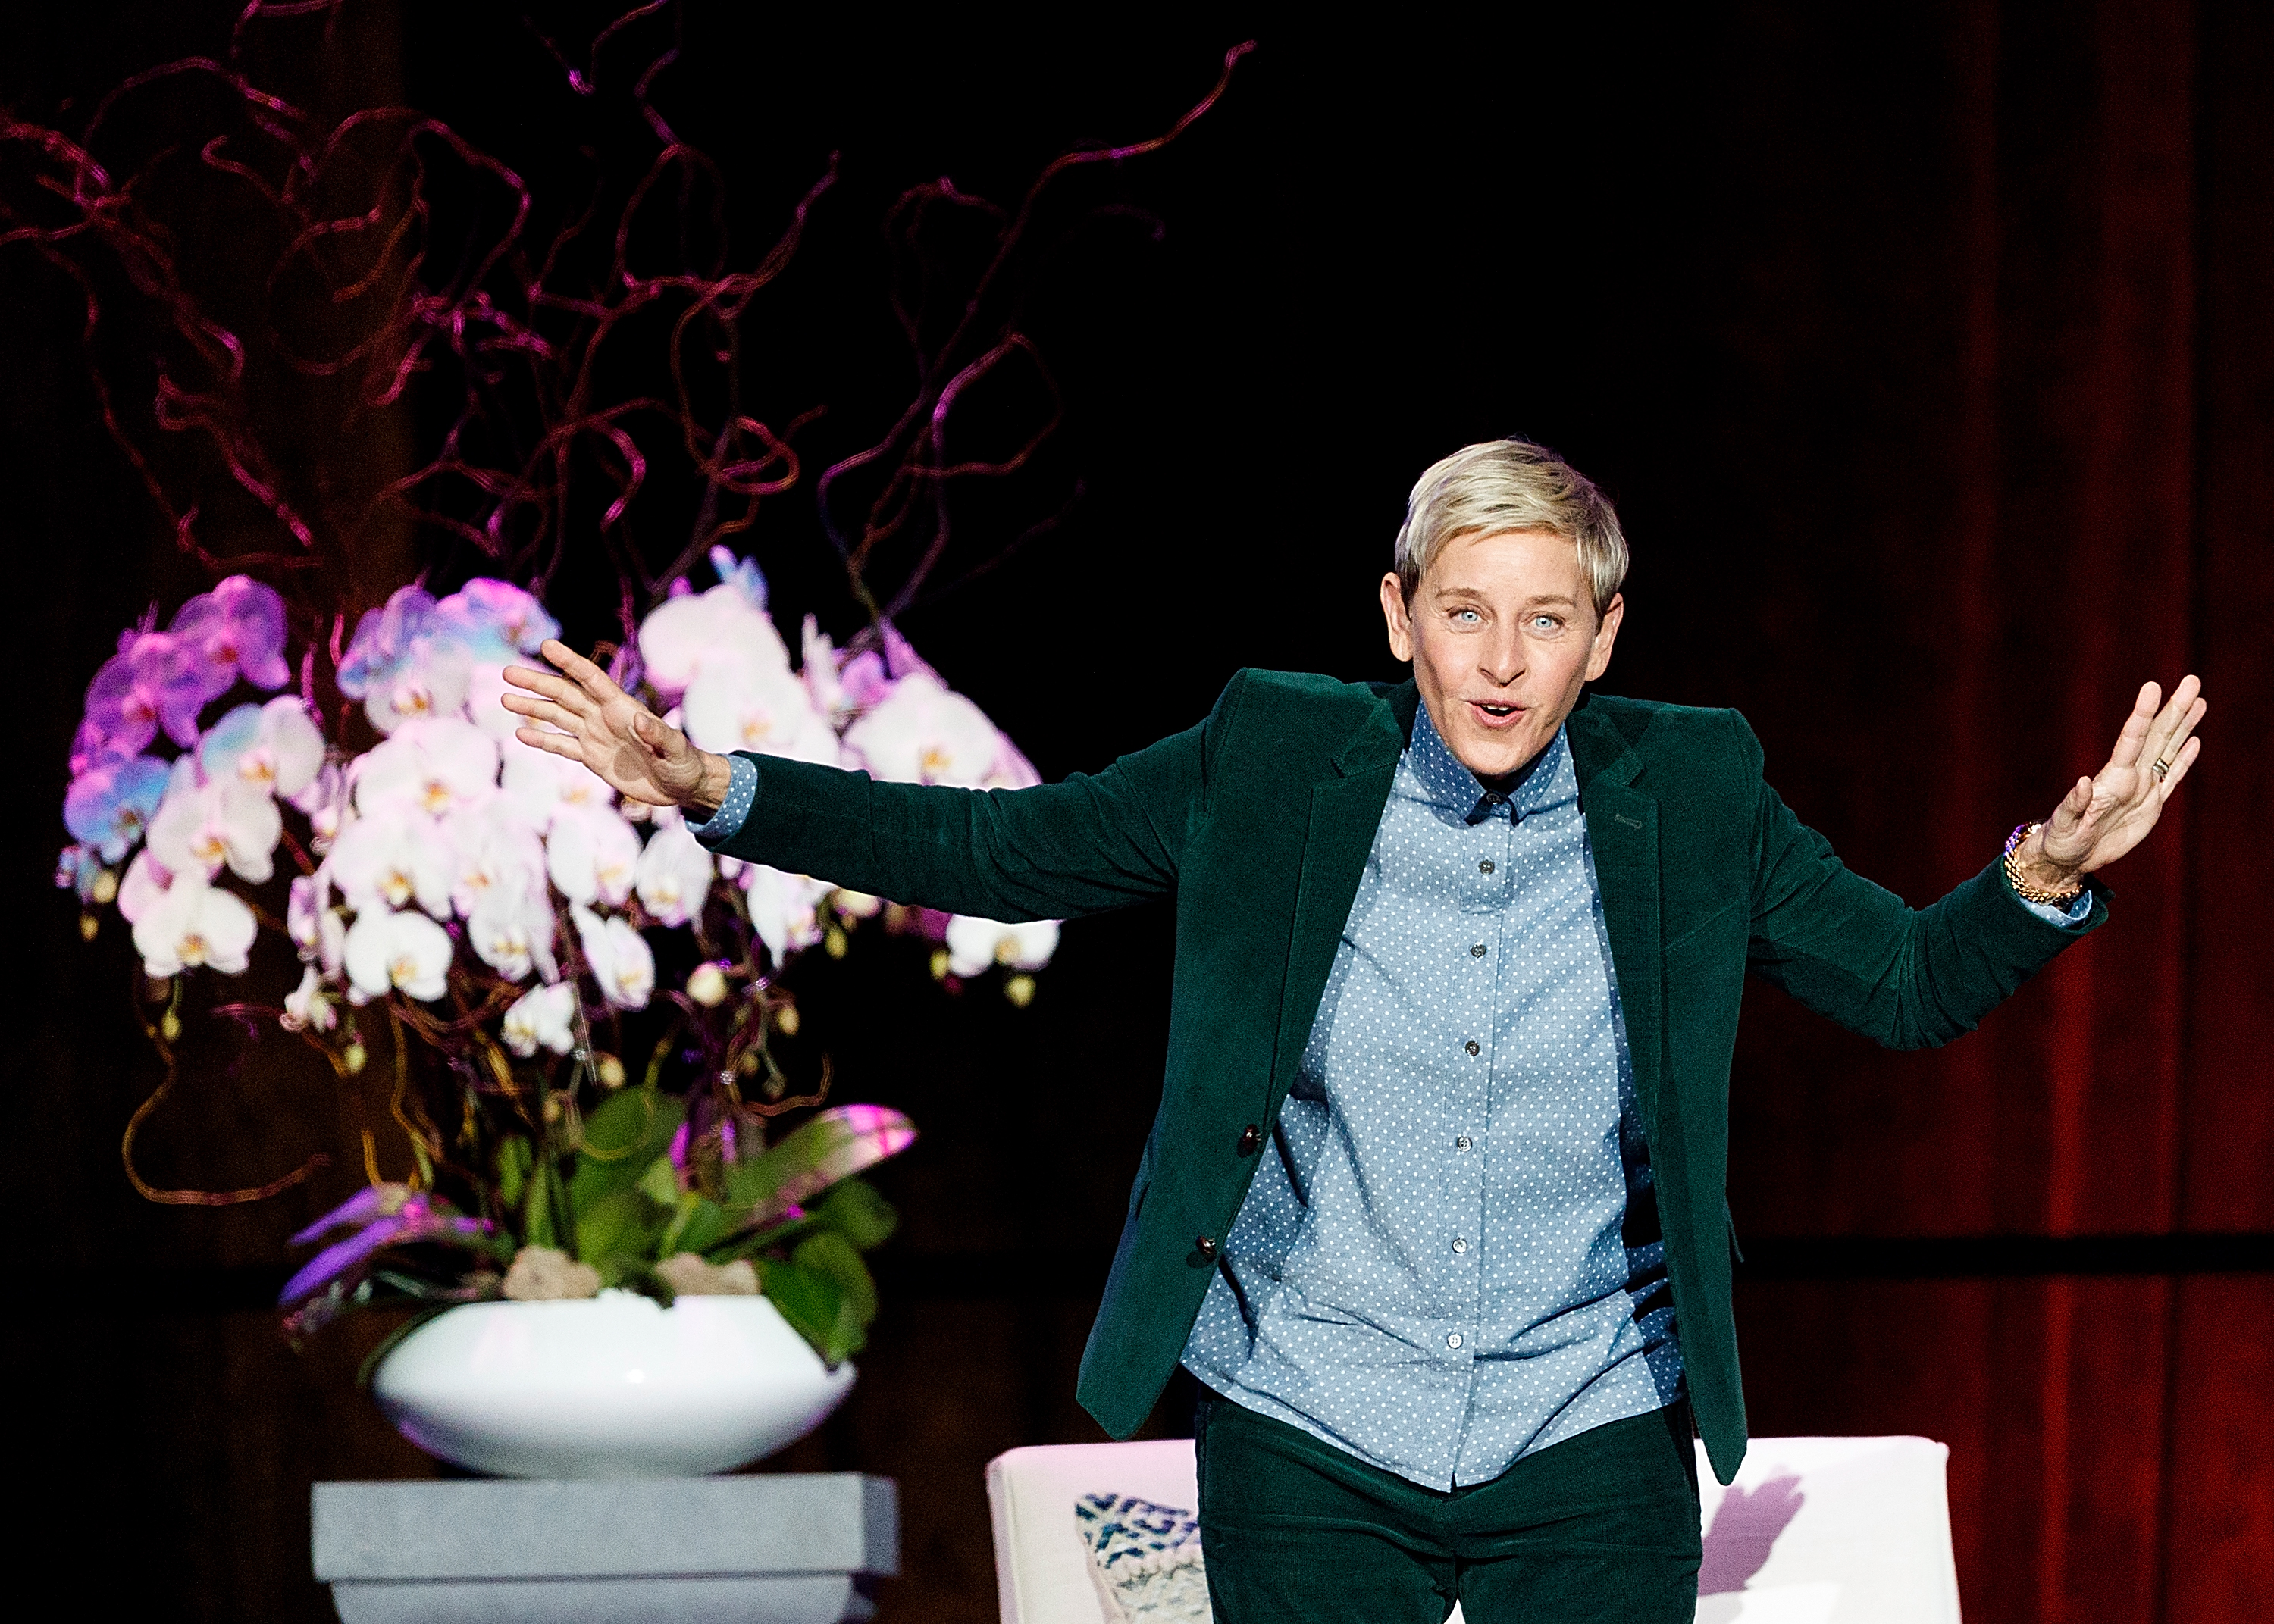 VANCOUVER, BC - OCTOBER 19:  Comedian Ellen DeGeneres seen onstage during &quot;A Conversation With Ellen DeGeneres&quot; at Rogers Arena on October 19, 2018 in Vancouver, Canada.  (Photo by Andrew Chin/Getty Images)